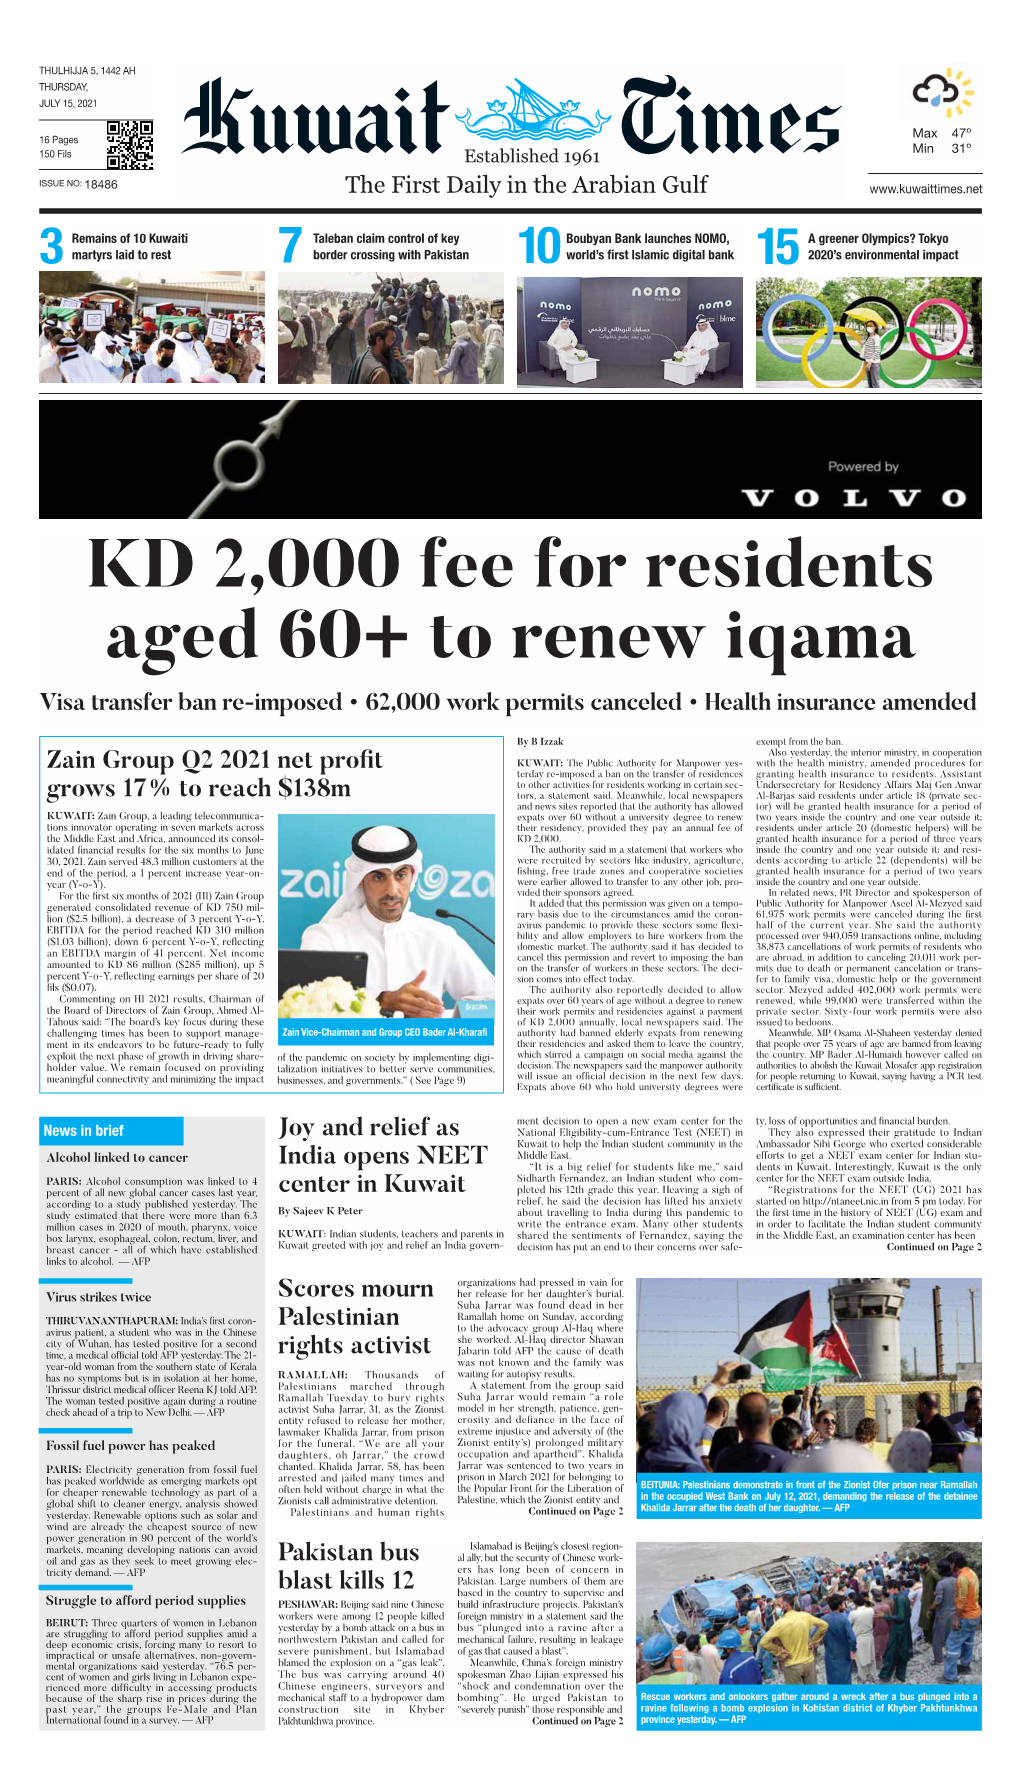 KD 2,000 Fee for Residents Aged 60+ to Renew Iqama Visa Transfer Ban Re-Imposed • 62,000 Work Permits Canceled • Health Insurance Amended